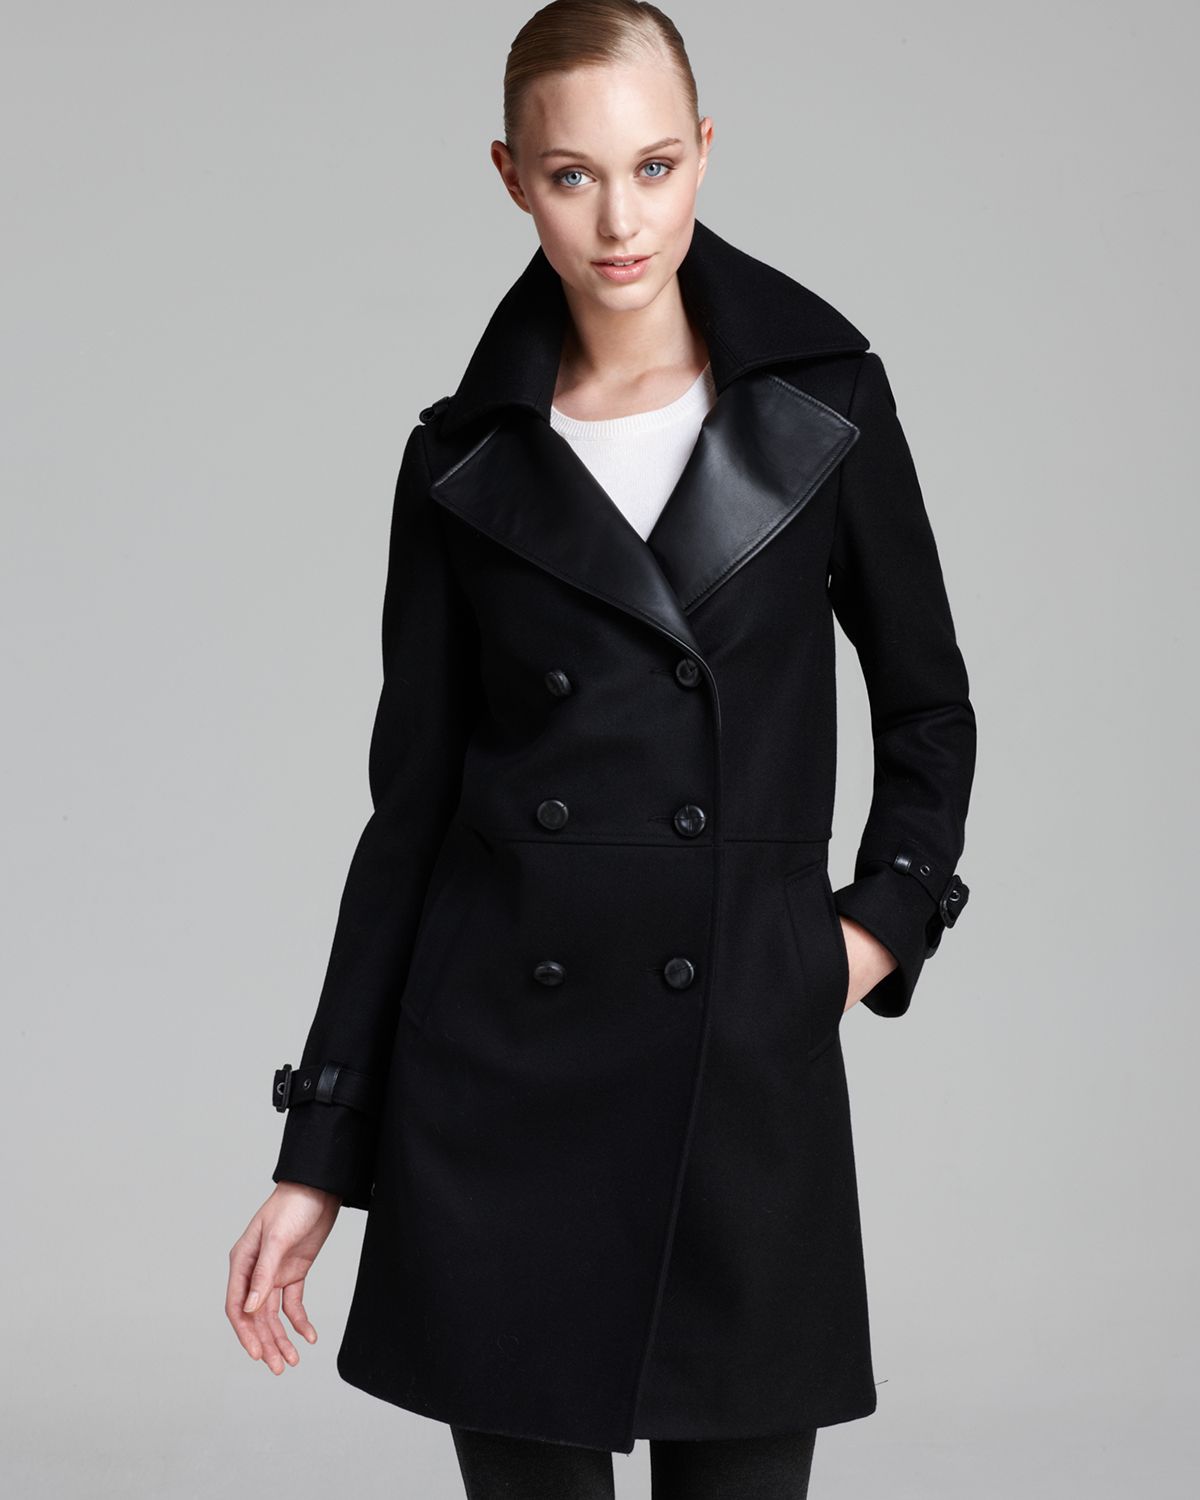 Mackage Coat Juniper with Leather Details in Black - Lyst